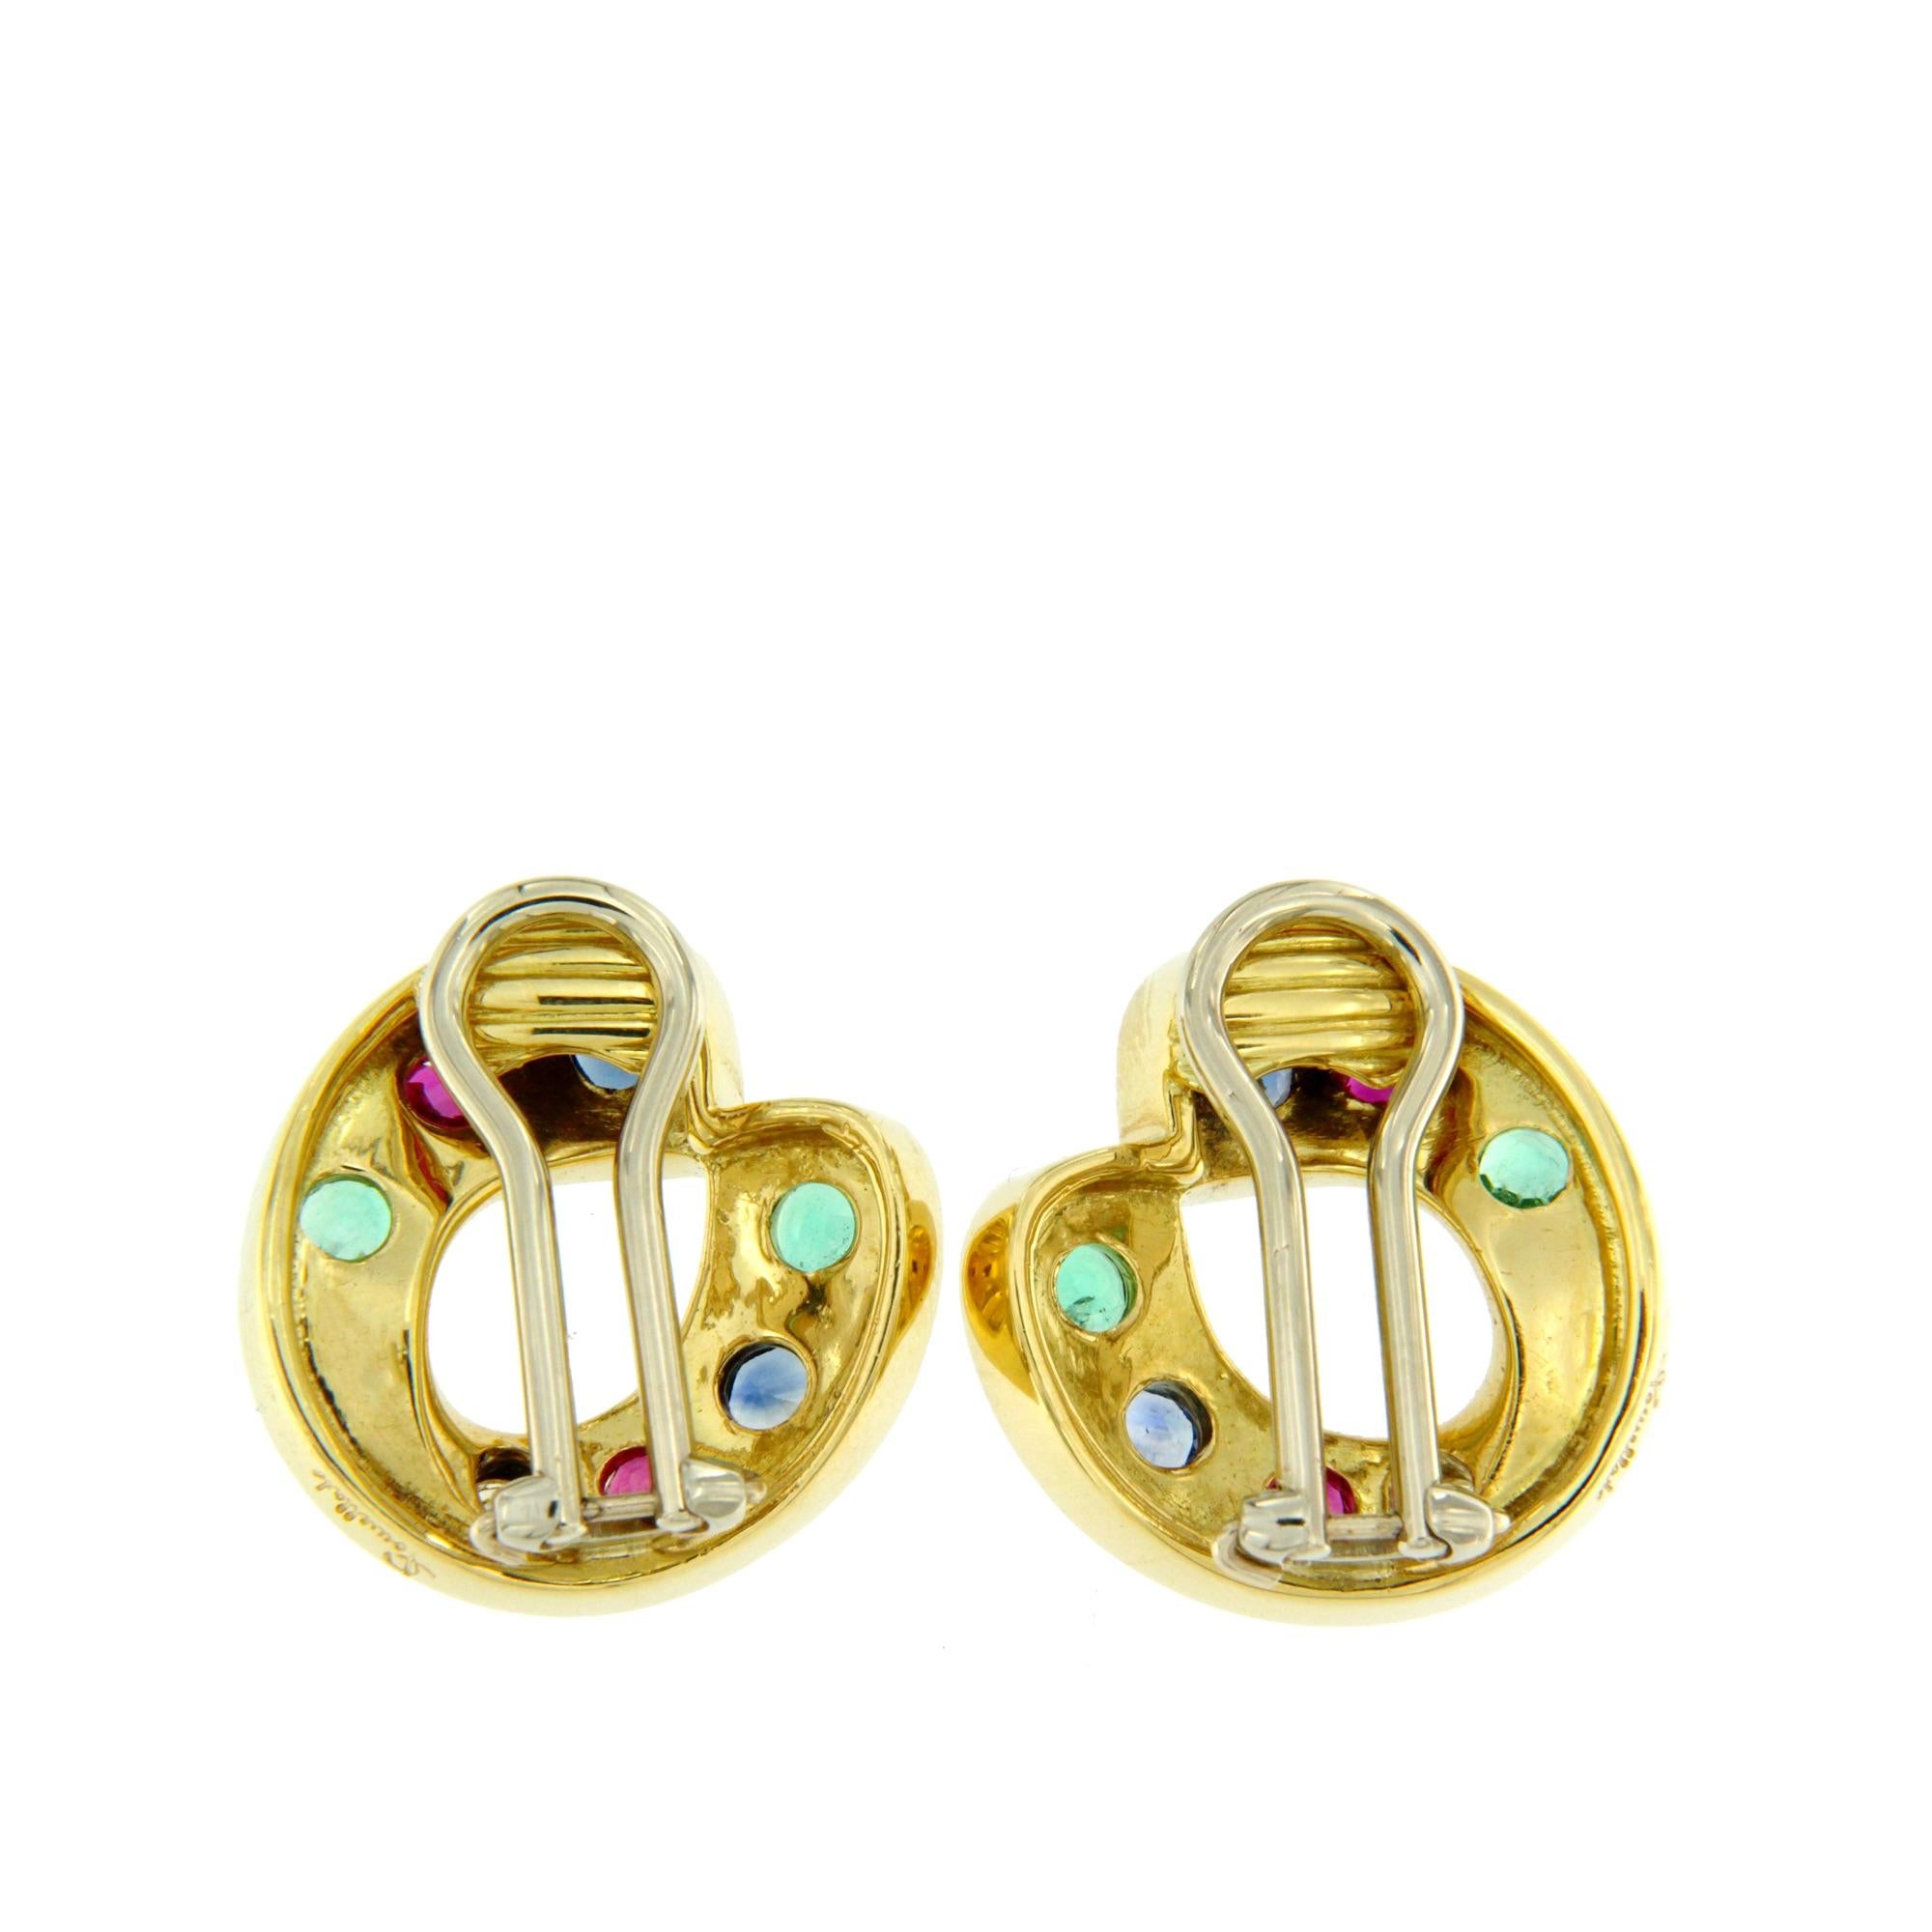 Vintage 1970’s Pomellato earrings in yellow gold
Emeralds, diamonds, rubies and sapphires of about 0.25  each.
Vintage Collection